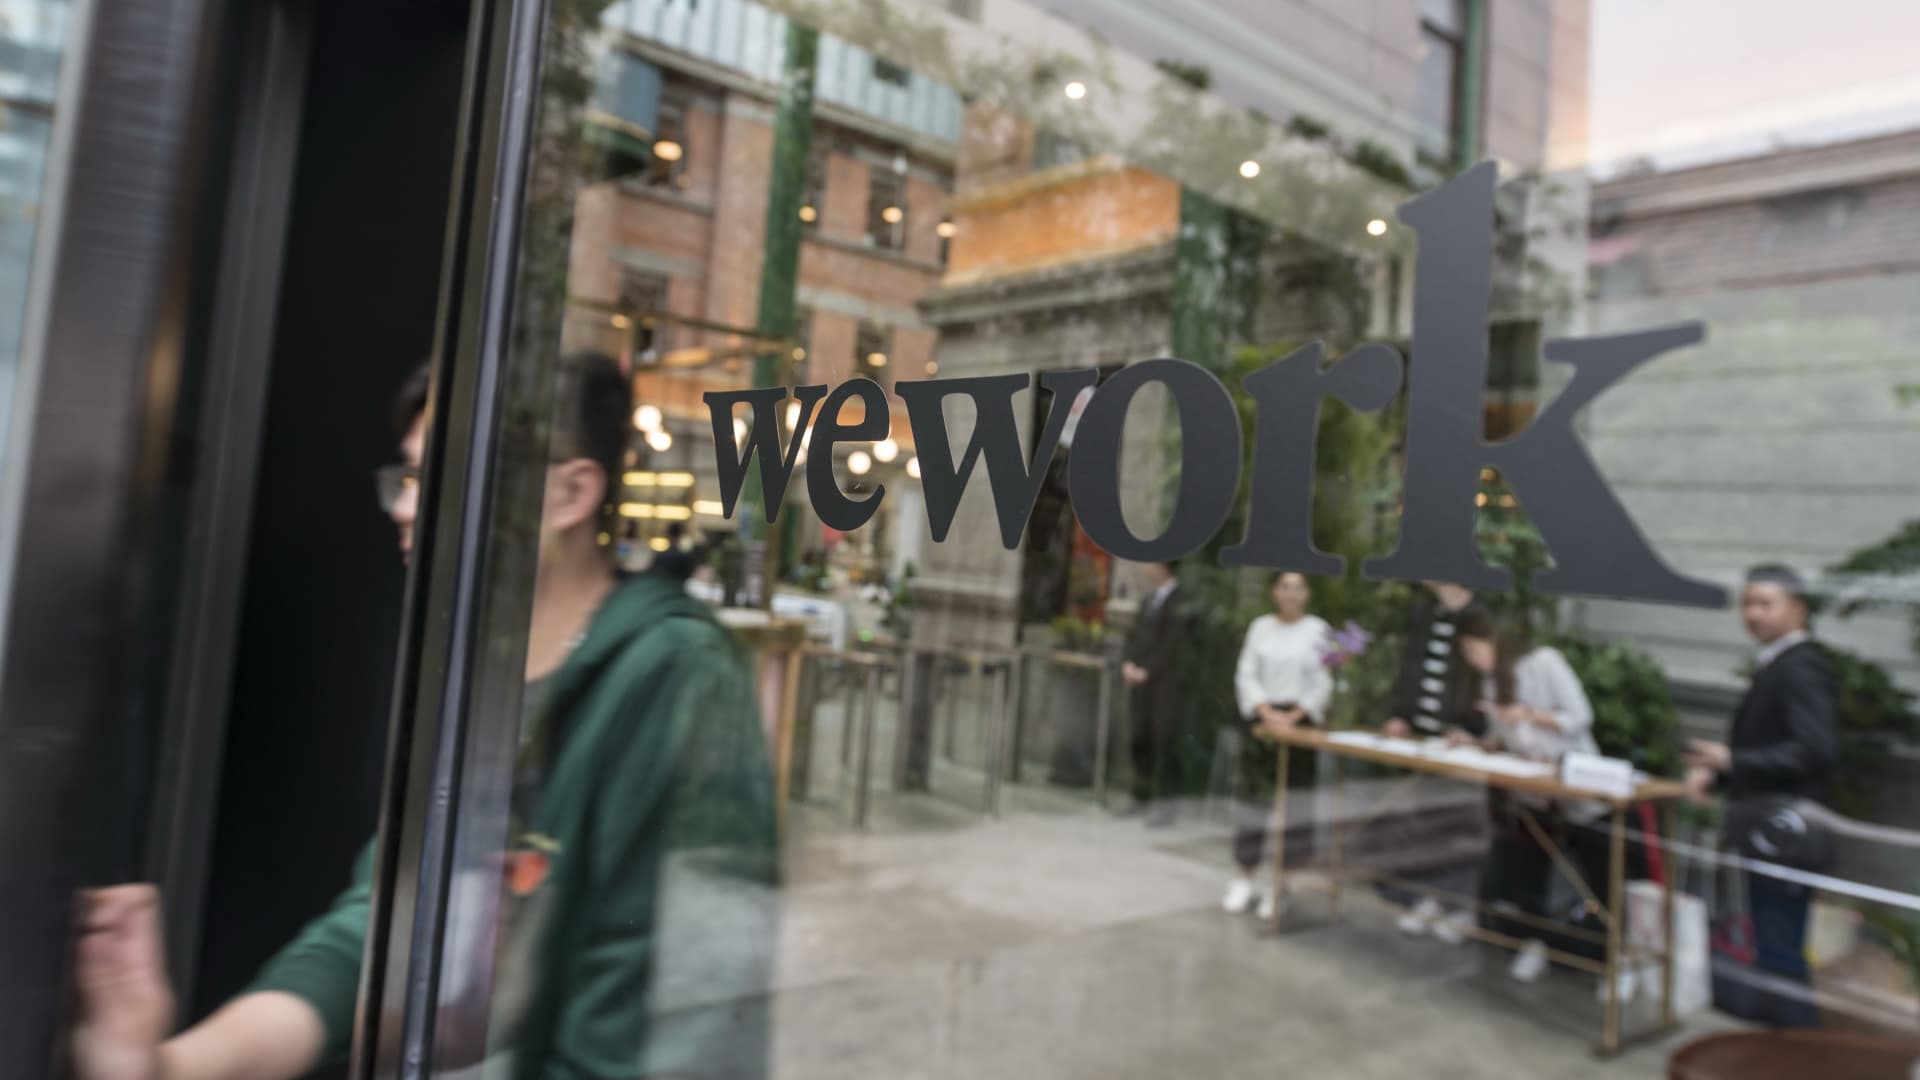 Stocks making the biggest moves midday: WeWork, Snowflake, United Airlines, Rite Aid and more